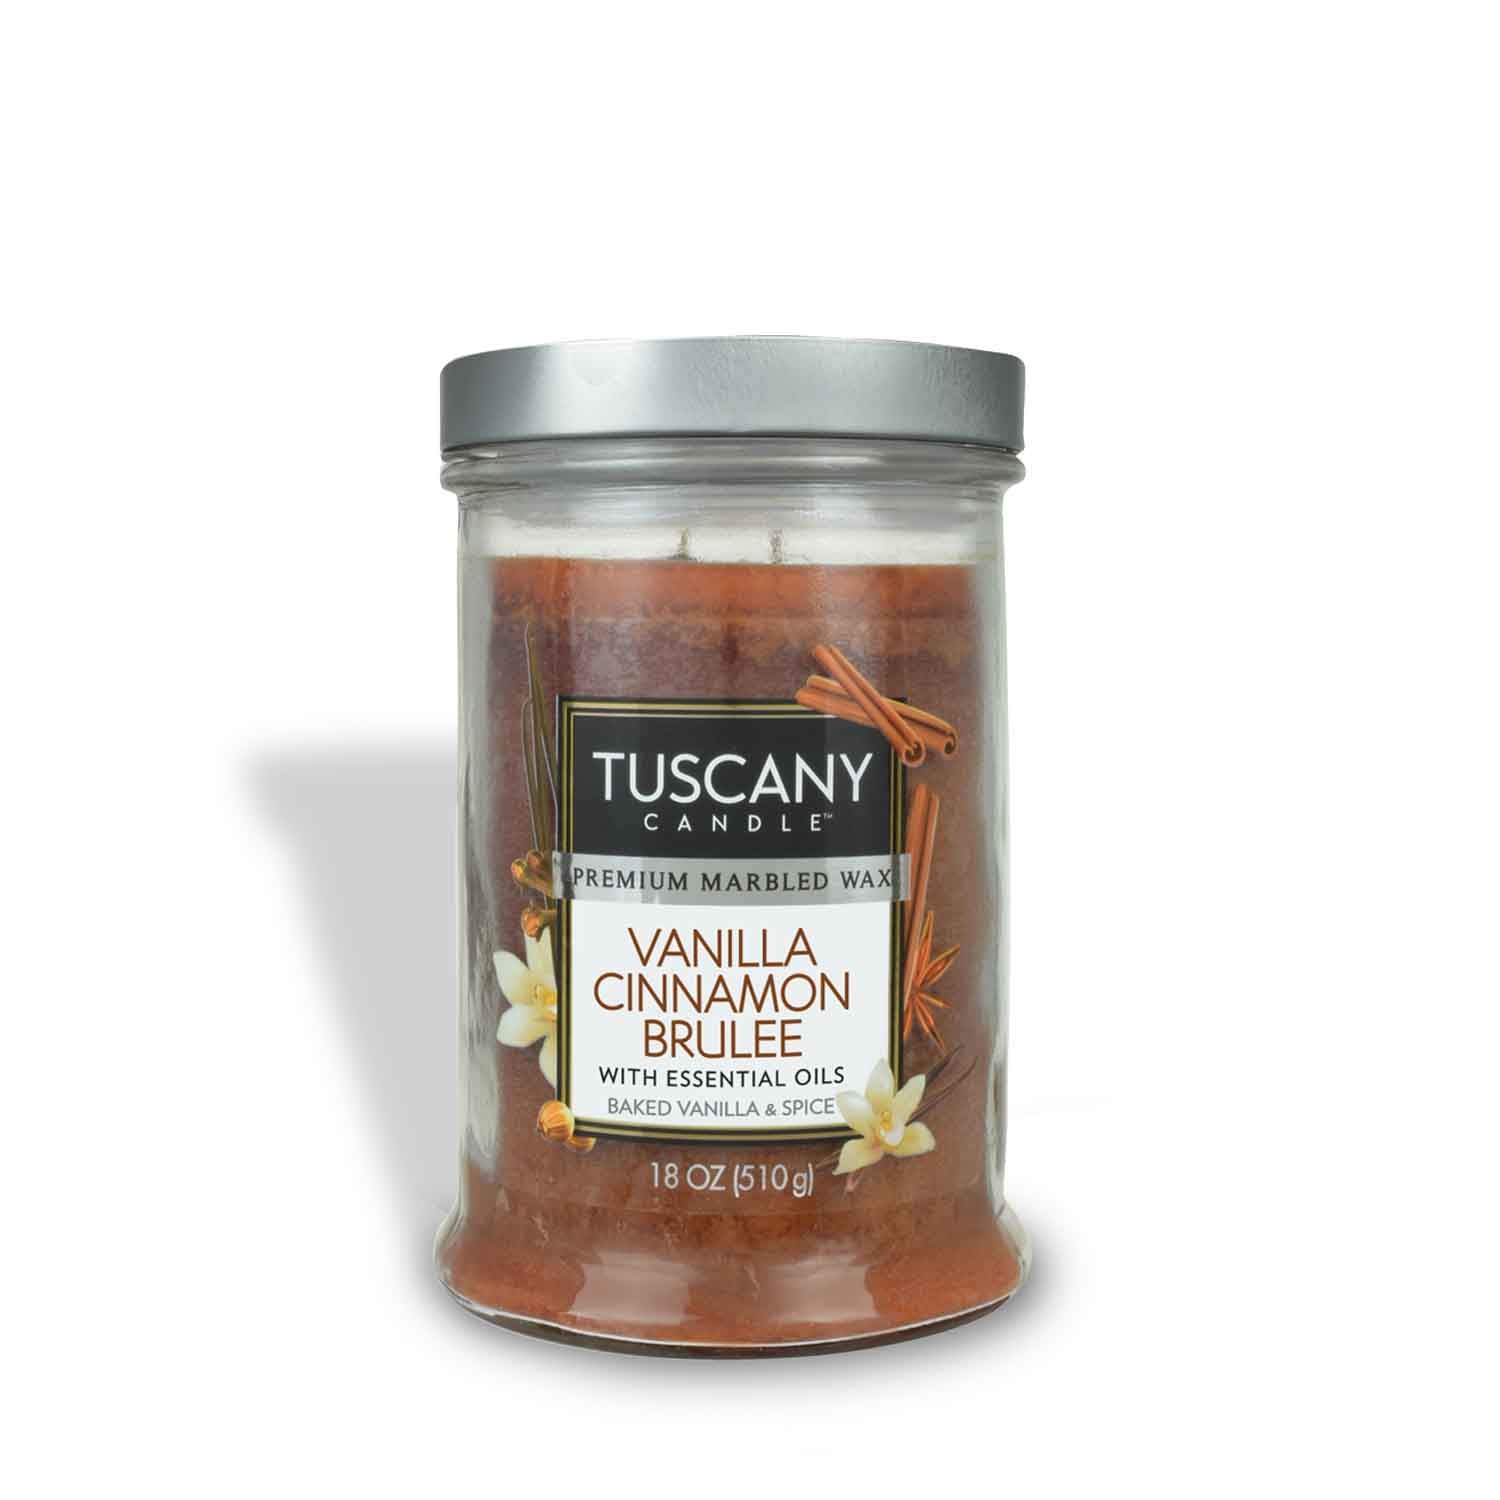 Vanilla Cinnamon Brulee - One of our most popular sweet candles